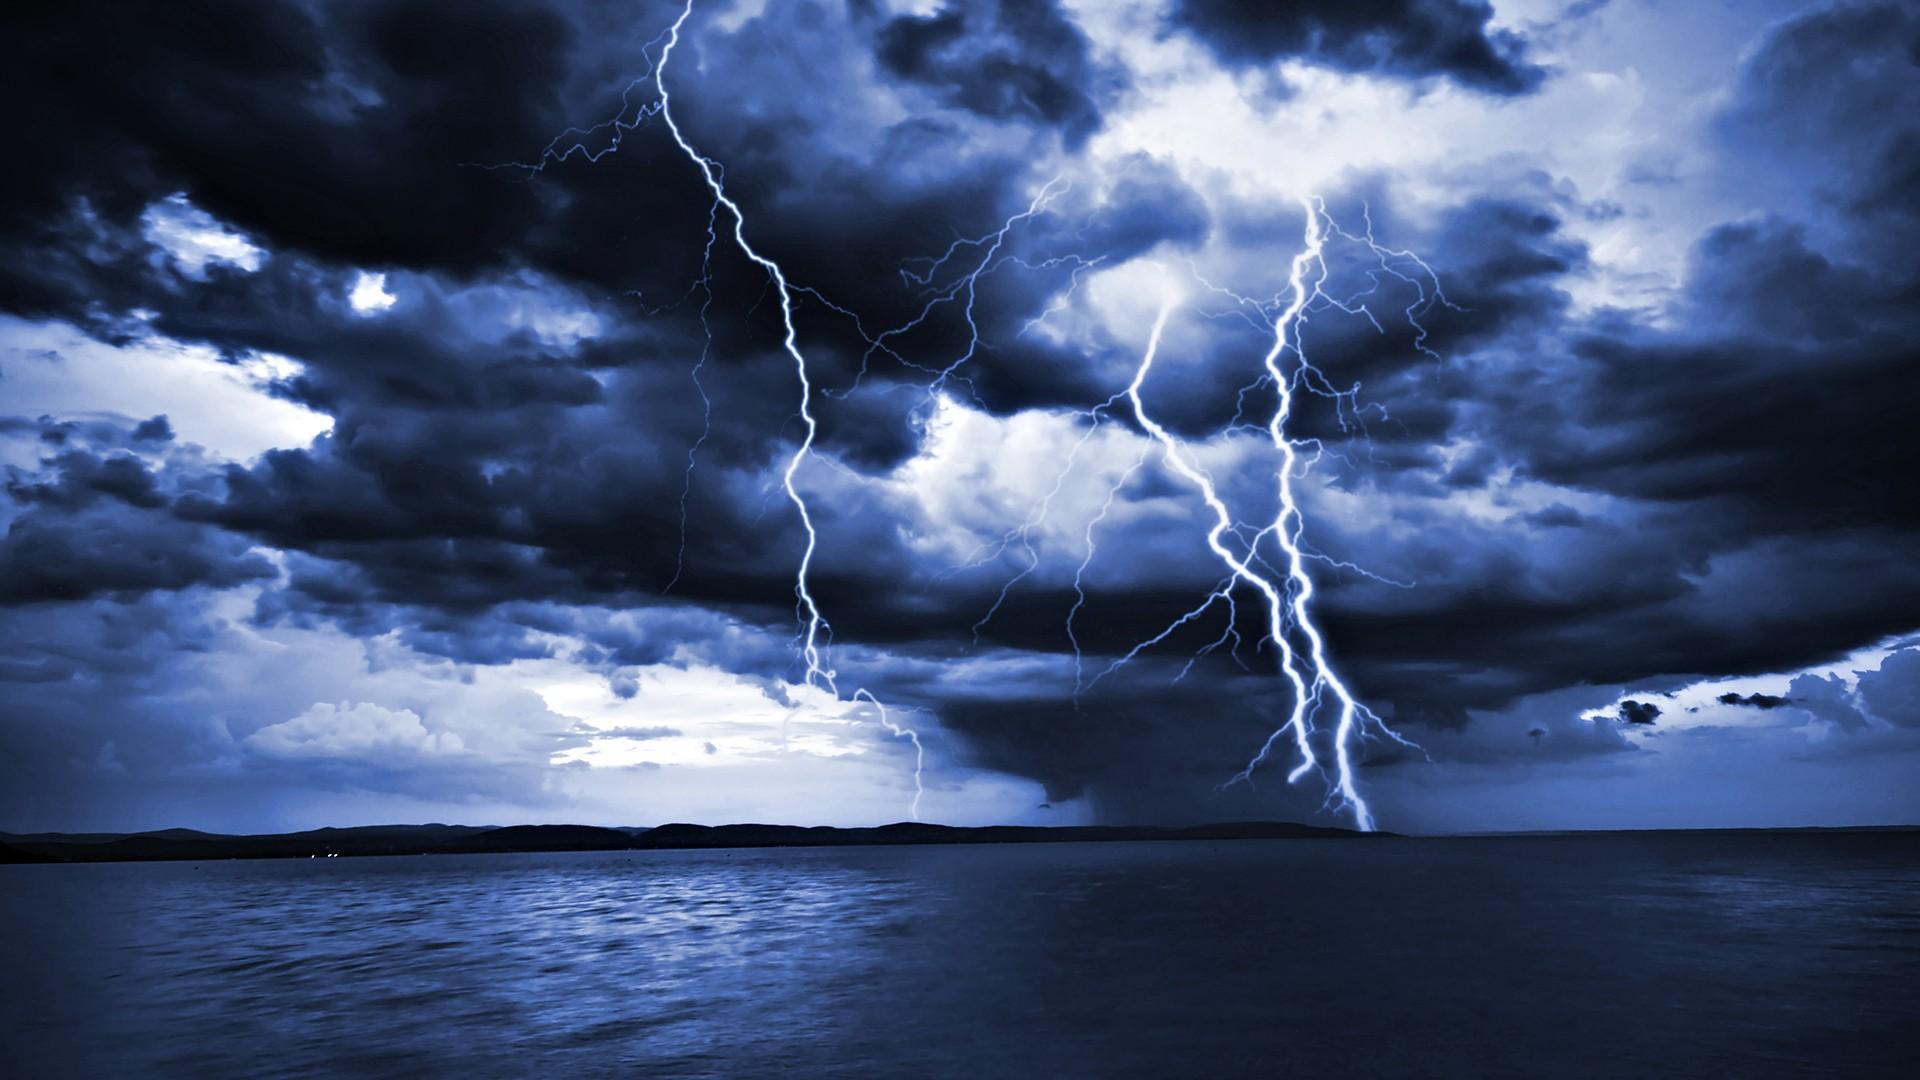 Sea Storm Live Wallpaper for Android